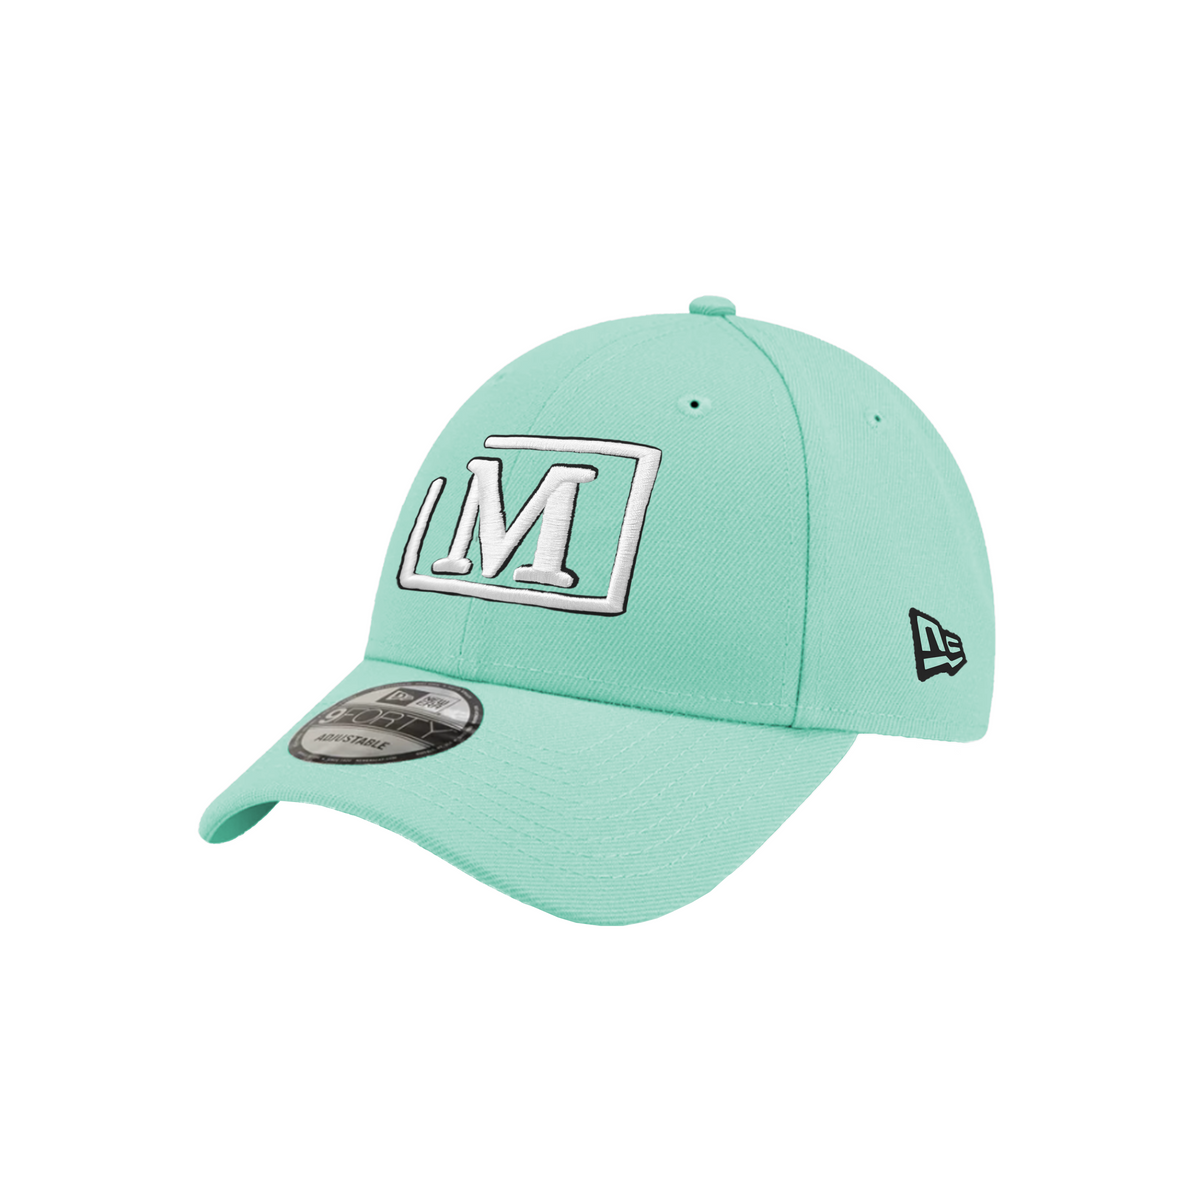 MDB Brand x New Era 9Forty Stretch Snap Embroidered Cap - Two Tone M Logo